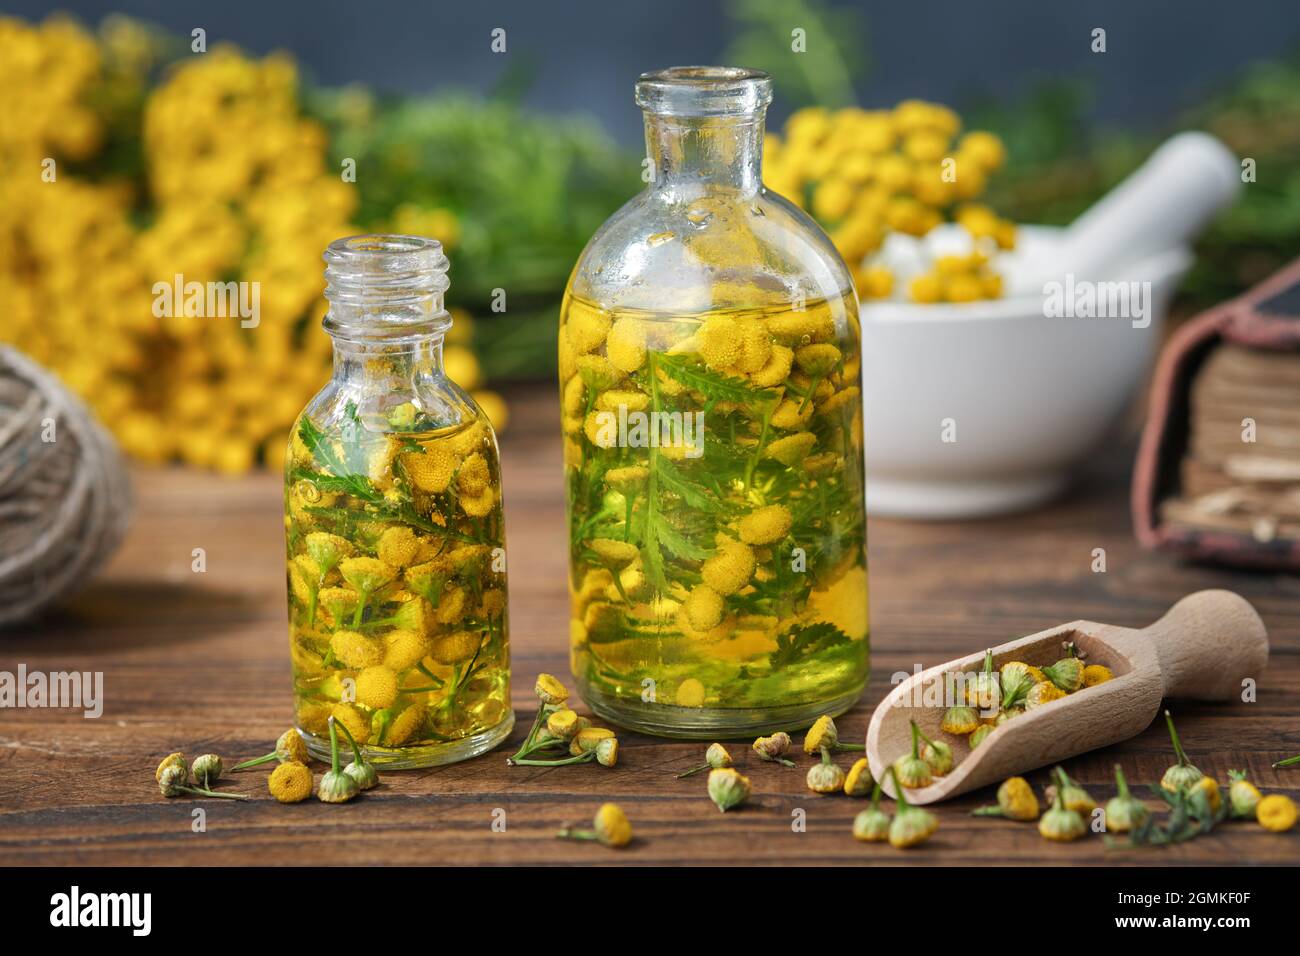 Essential oil or infusion bottles of tansy healthy herbs, blooming common tansy plants on background. Alternative and herbal medicine. Stock Photo